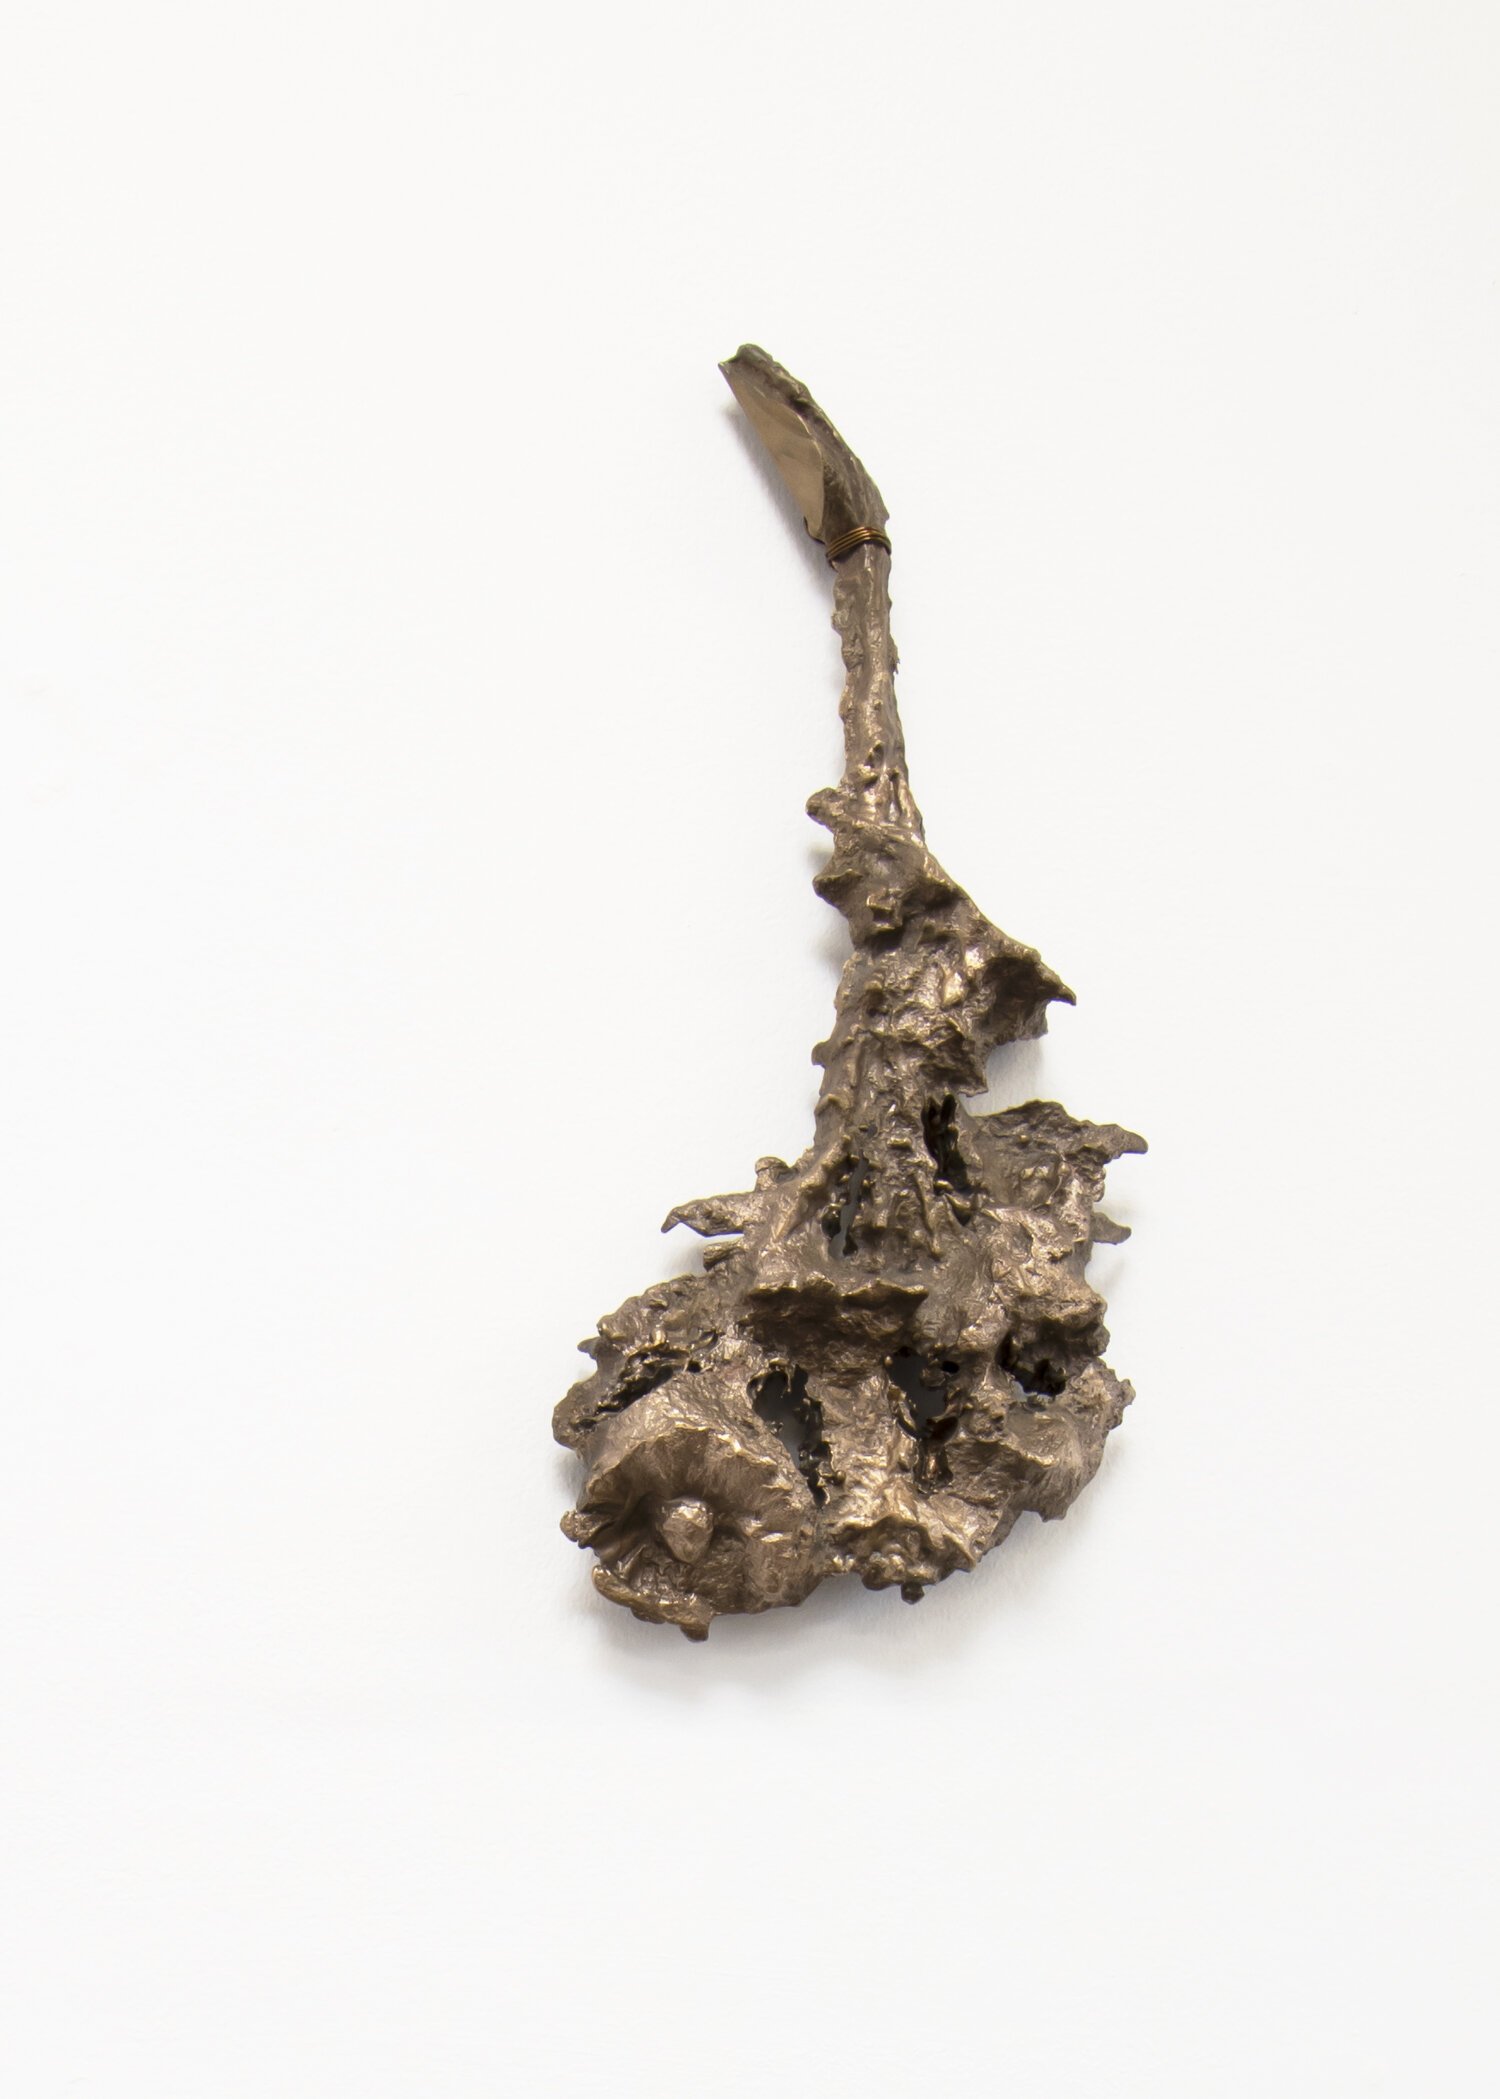   Flowers , 2016, bronze, 15.75 x 8 x 3 inches 